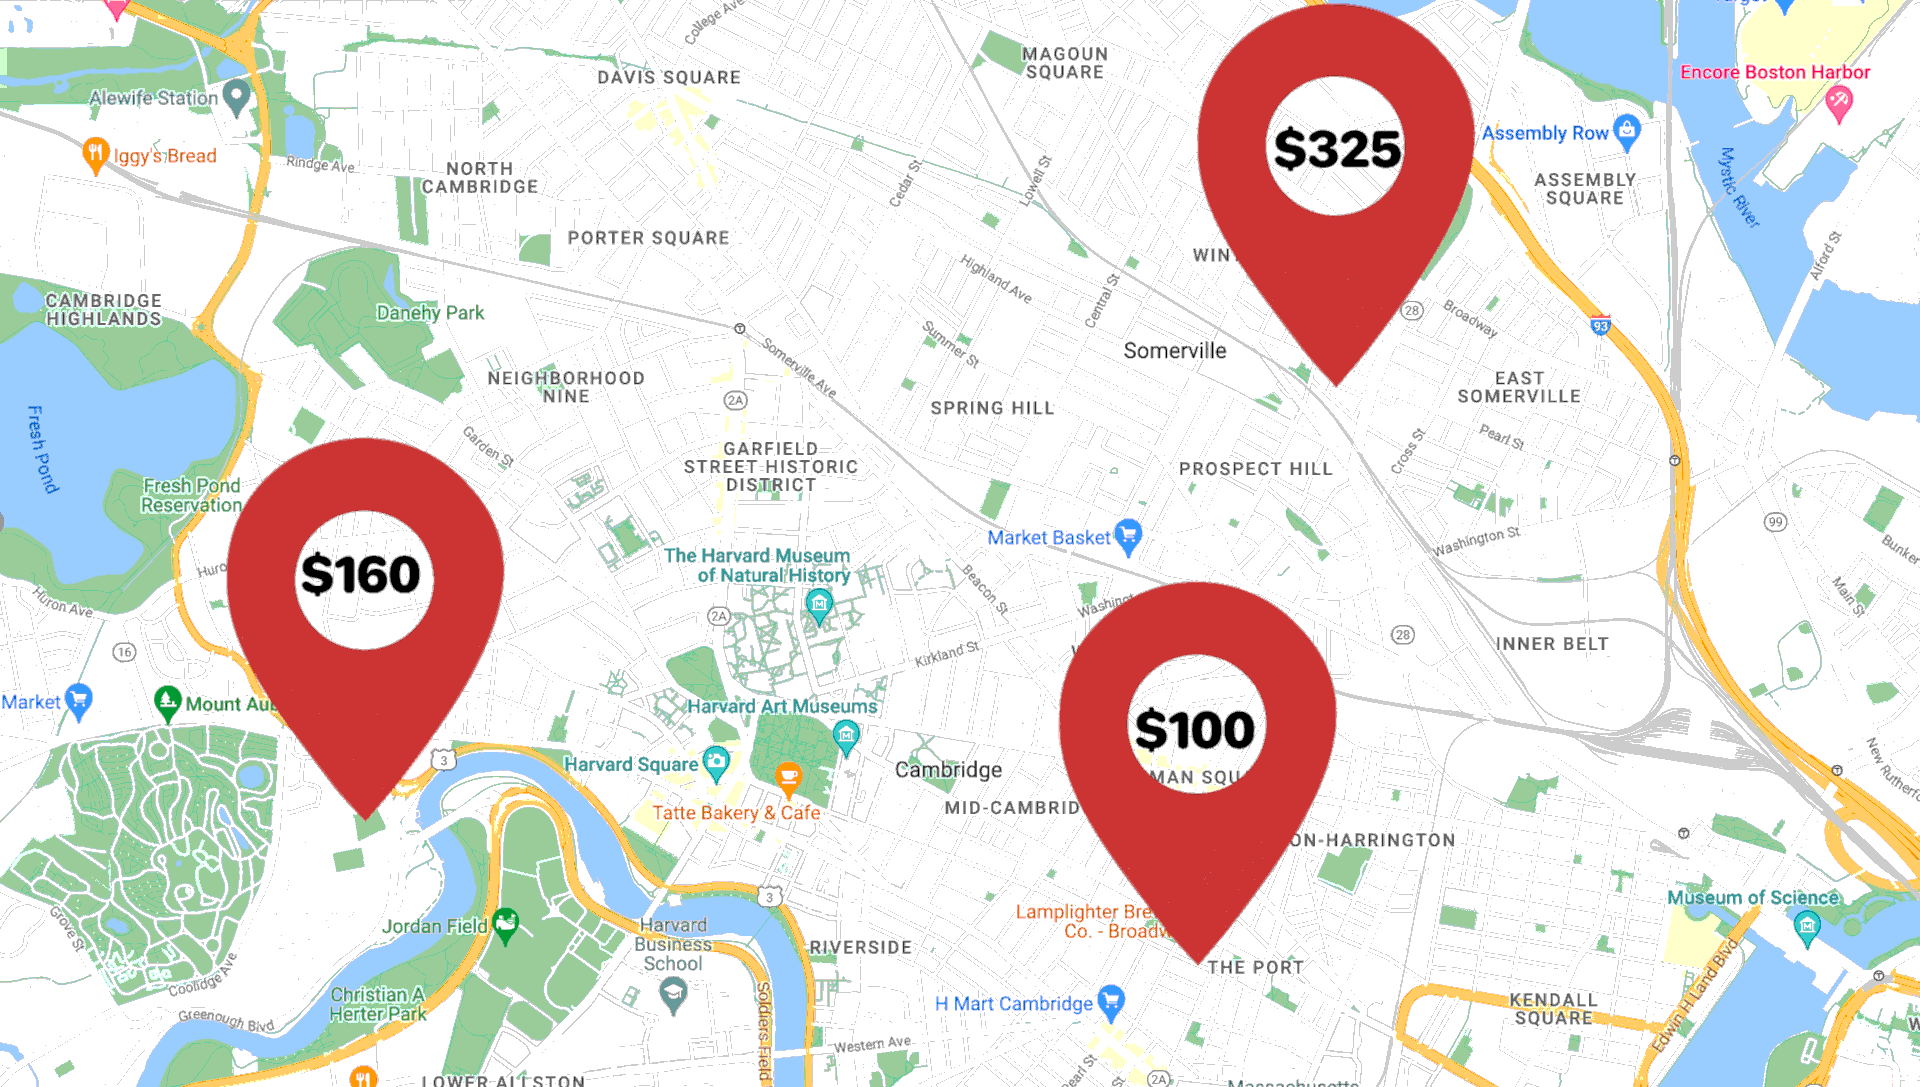 A map with markers showing the dynamic pricing strategy based on the location of services like hotels